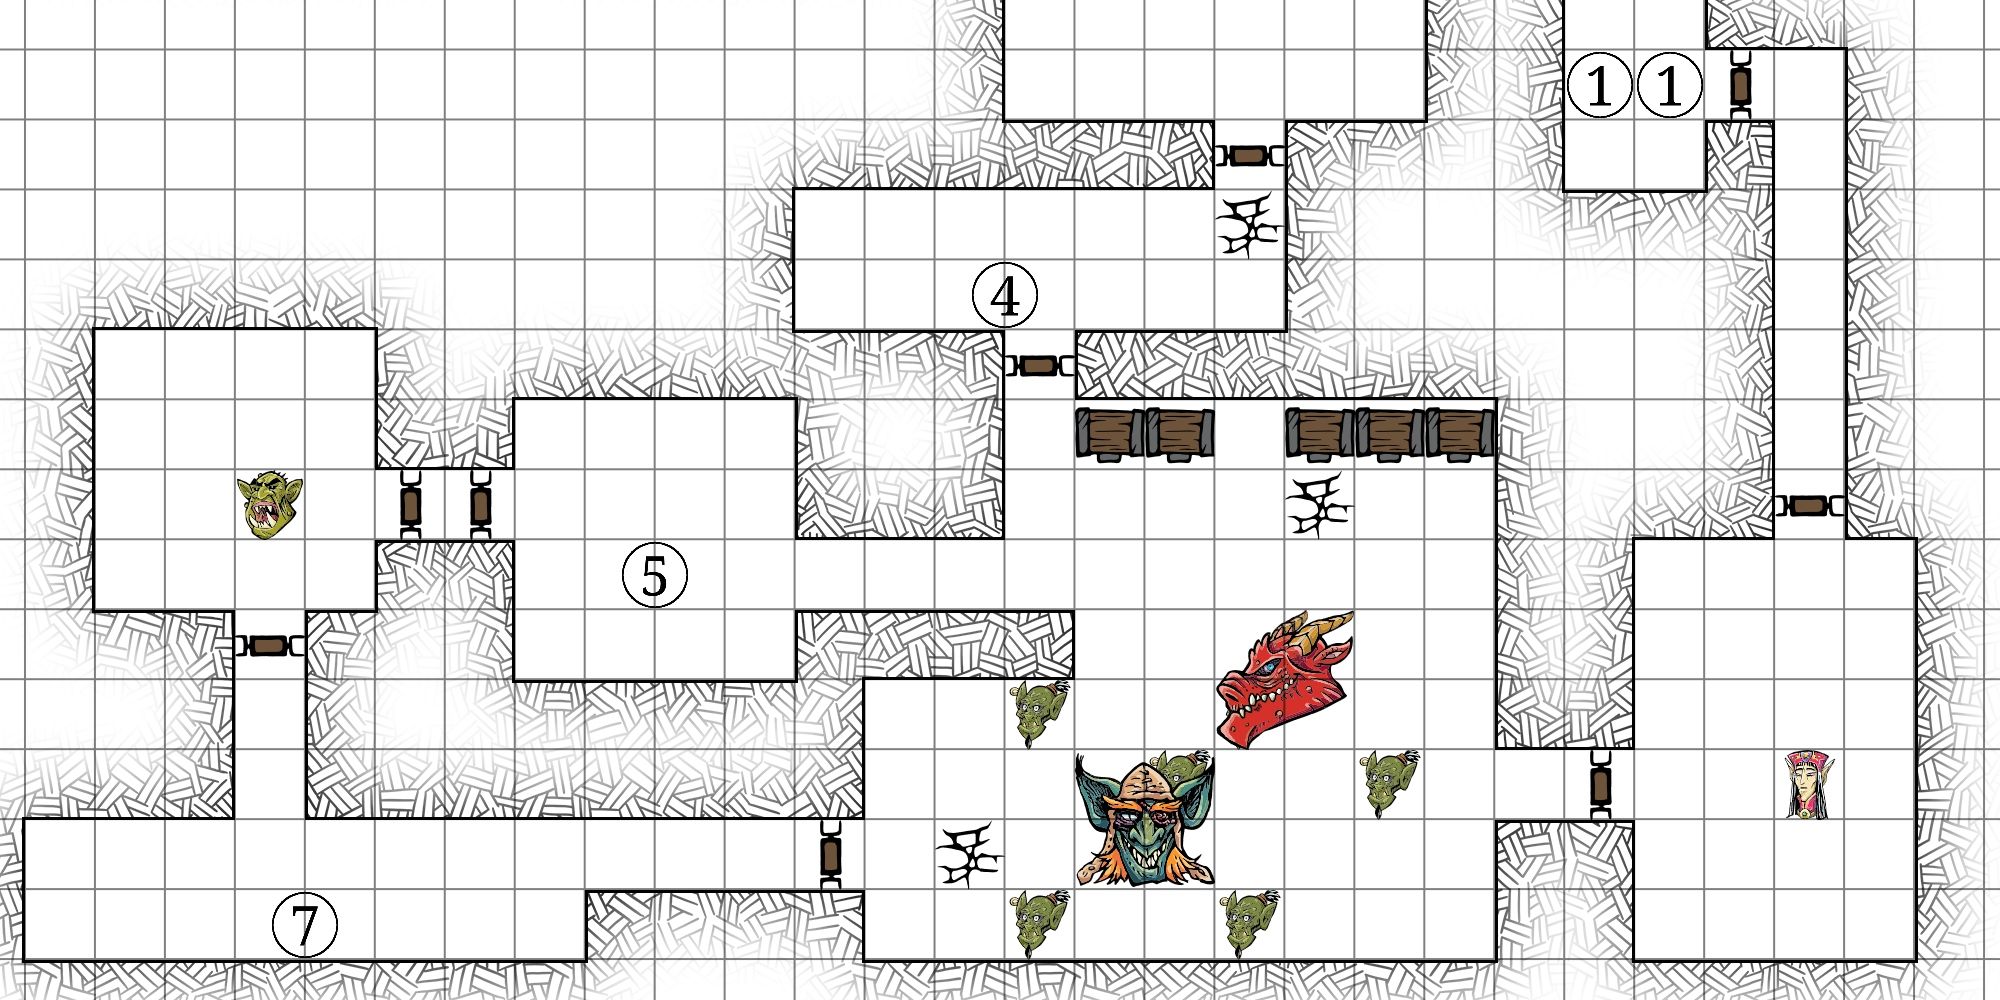 Almost black and white dungeon map with colored enemy markers